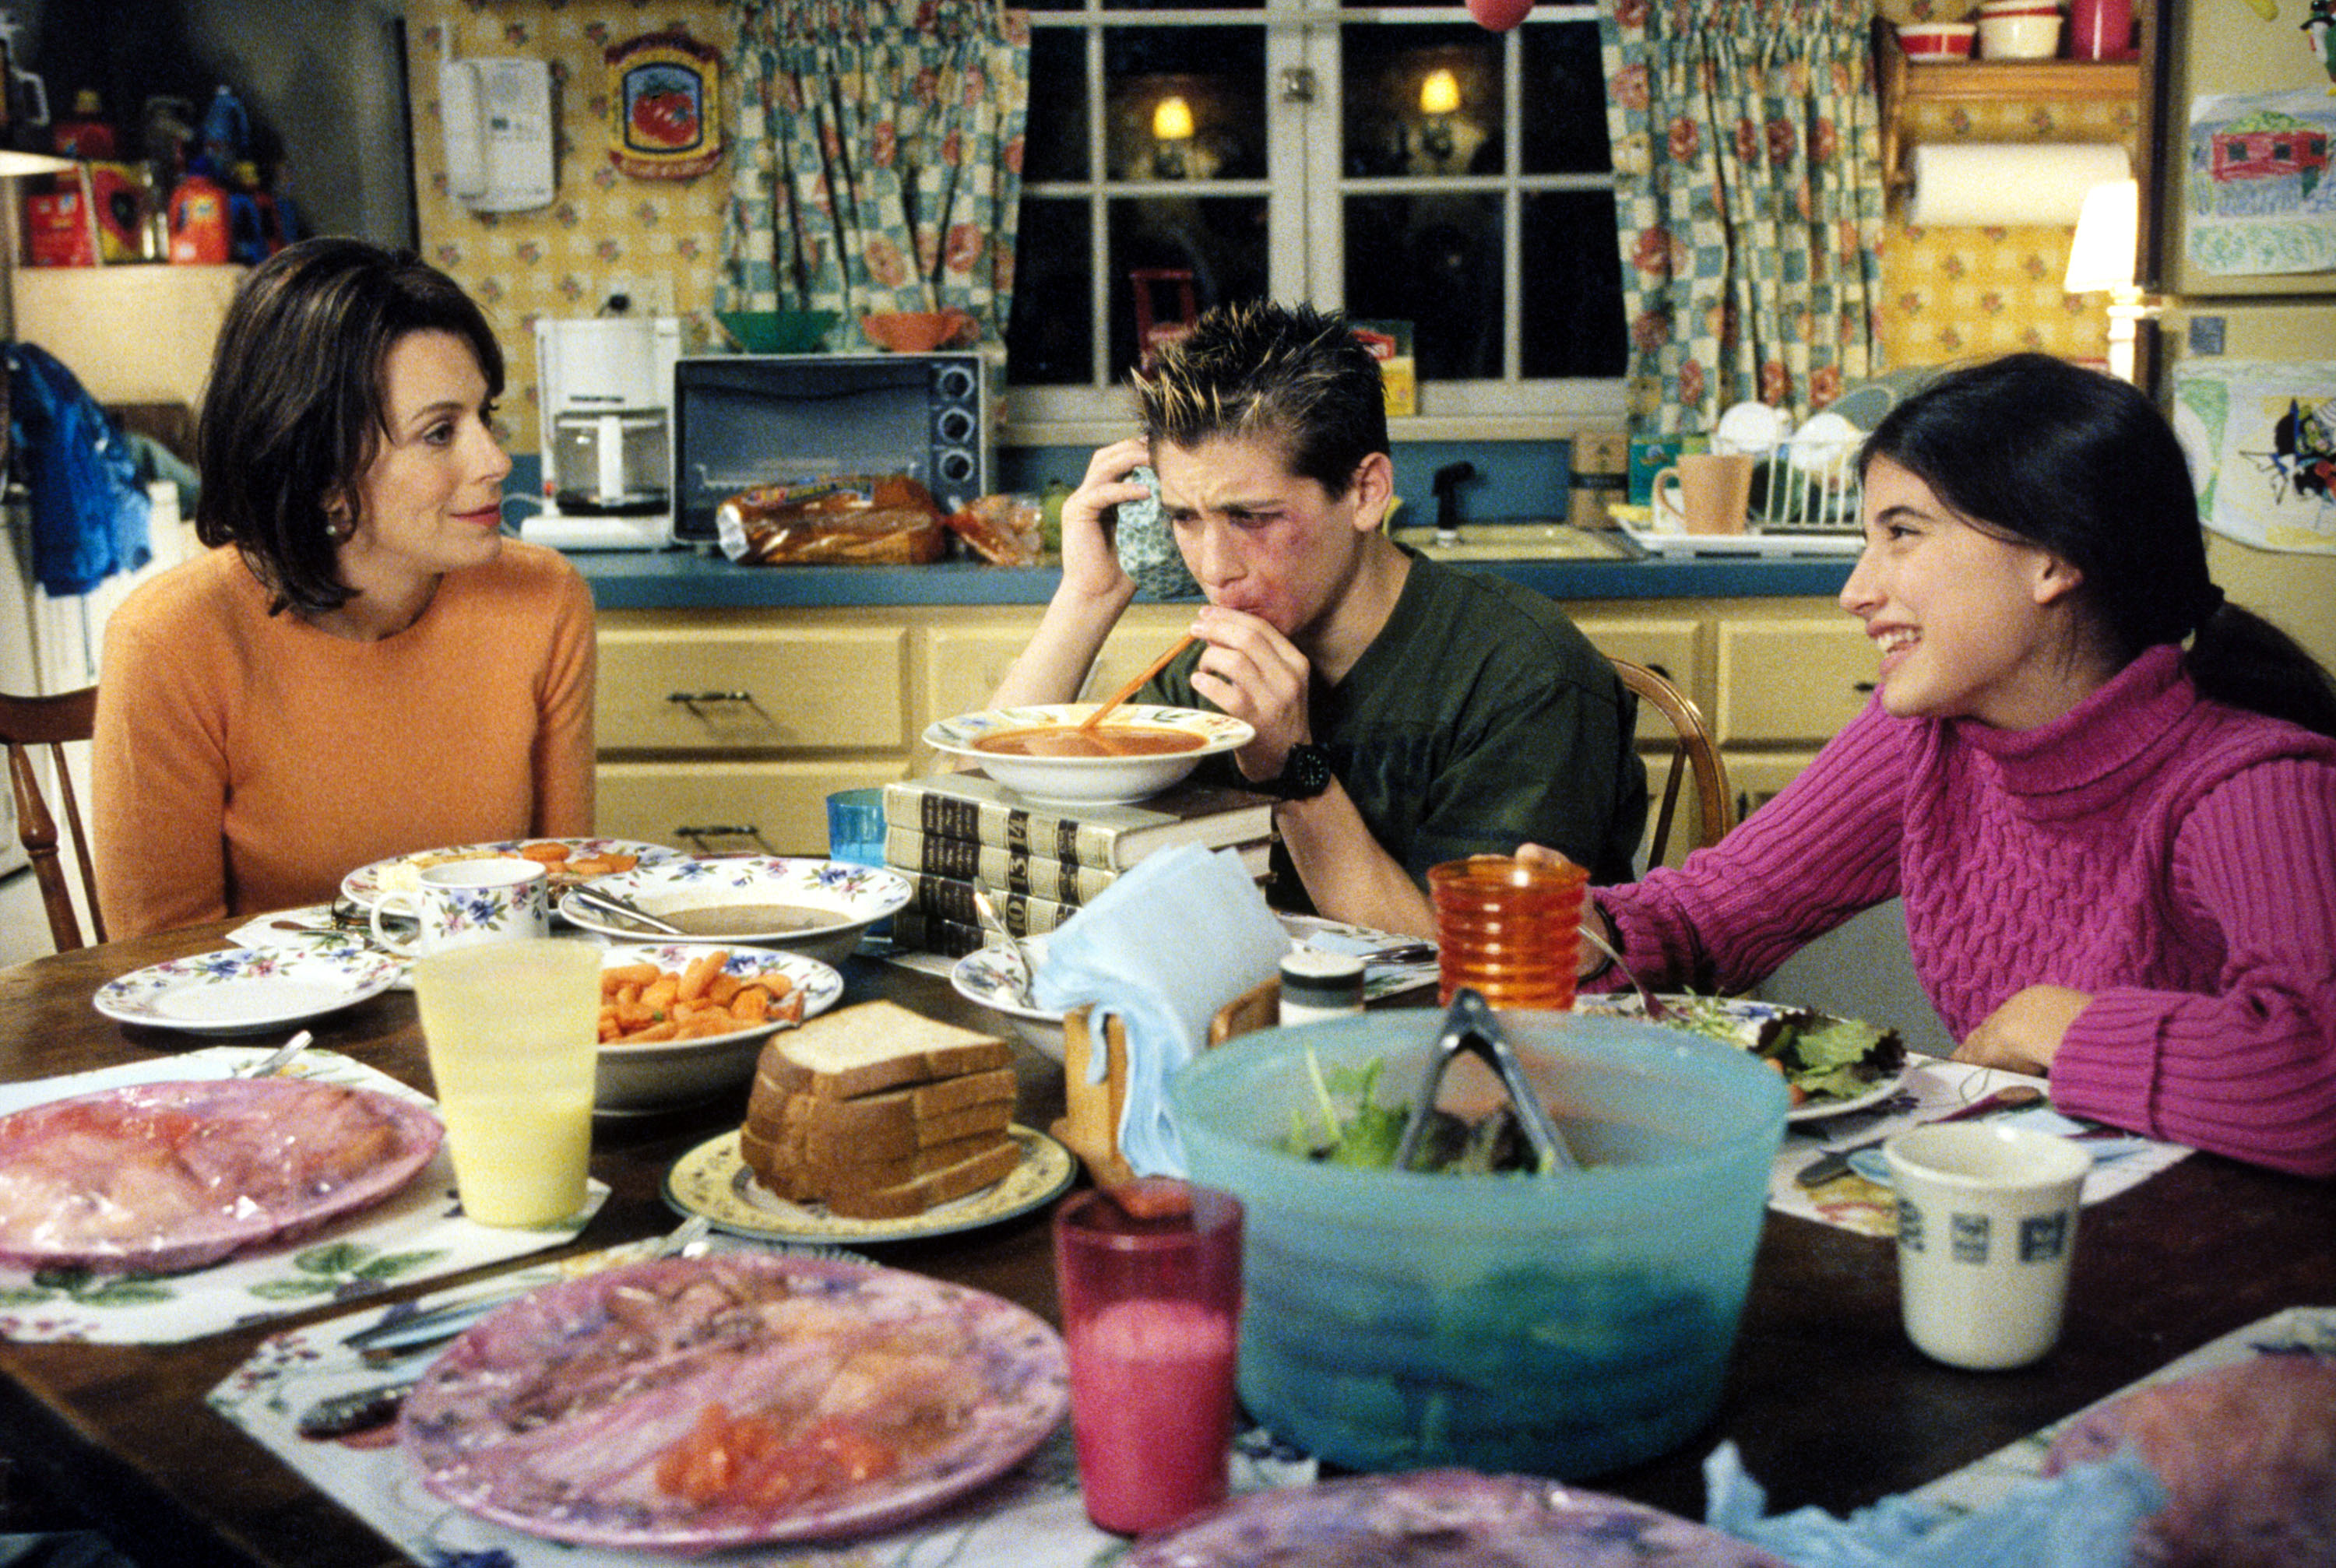 3x14 Cynthia's Back still - Malcolm in the Middle VC - Gallery Photos.